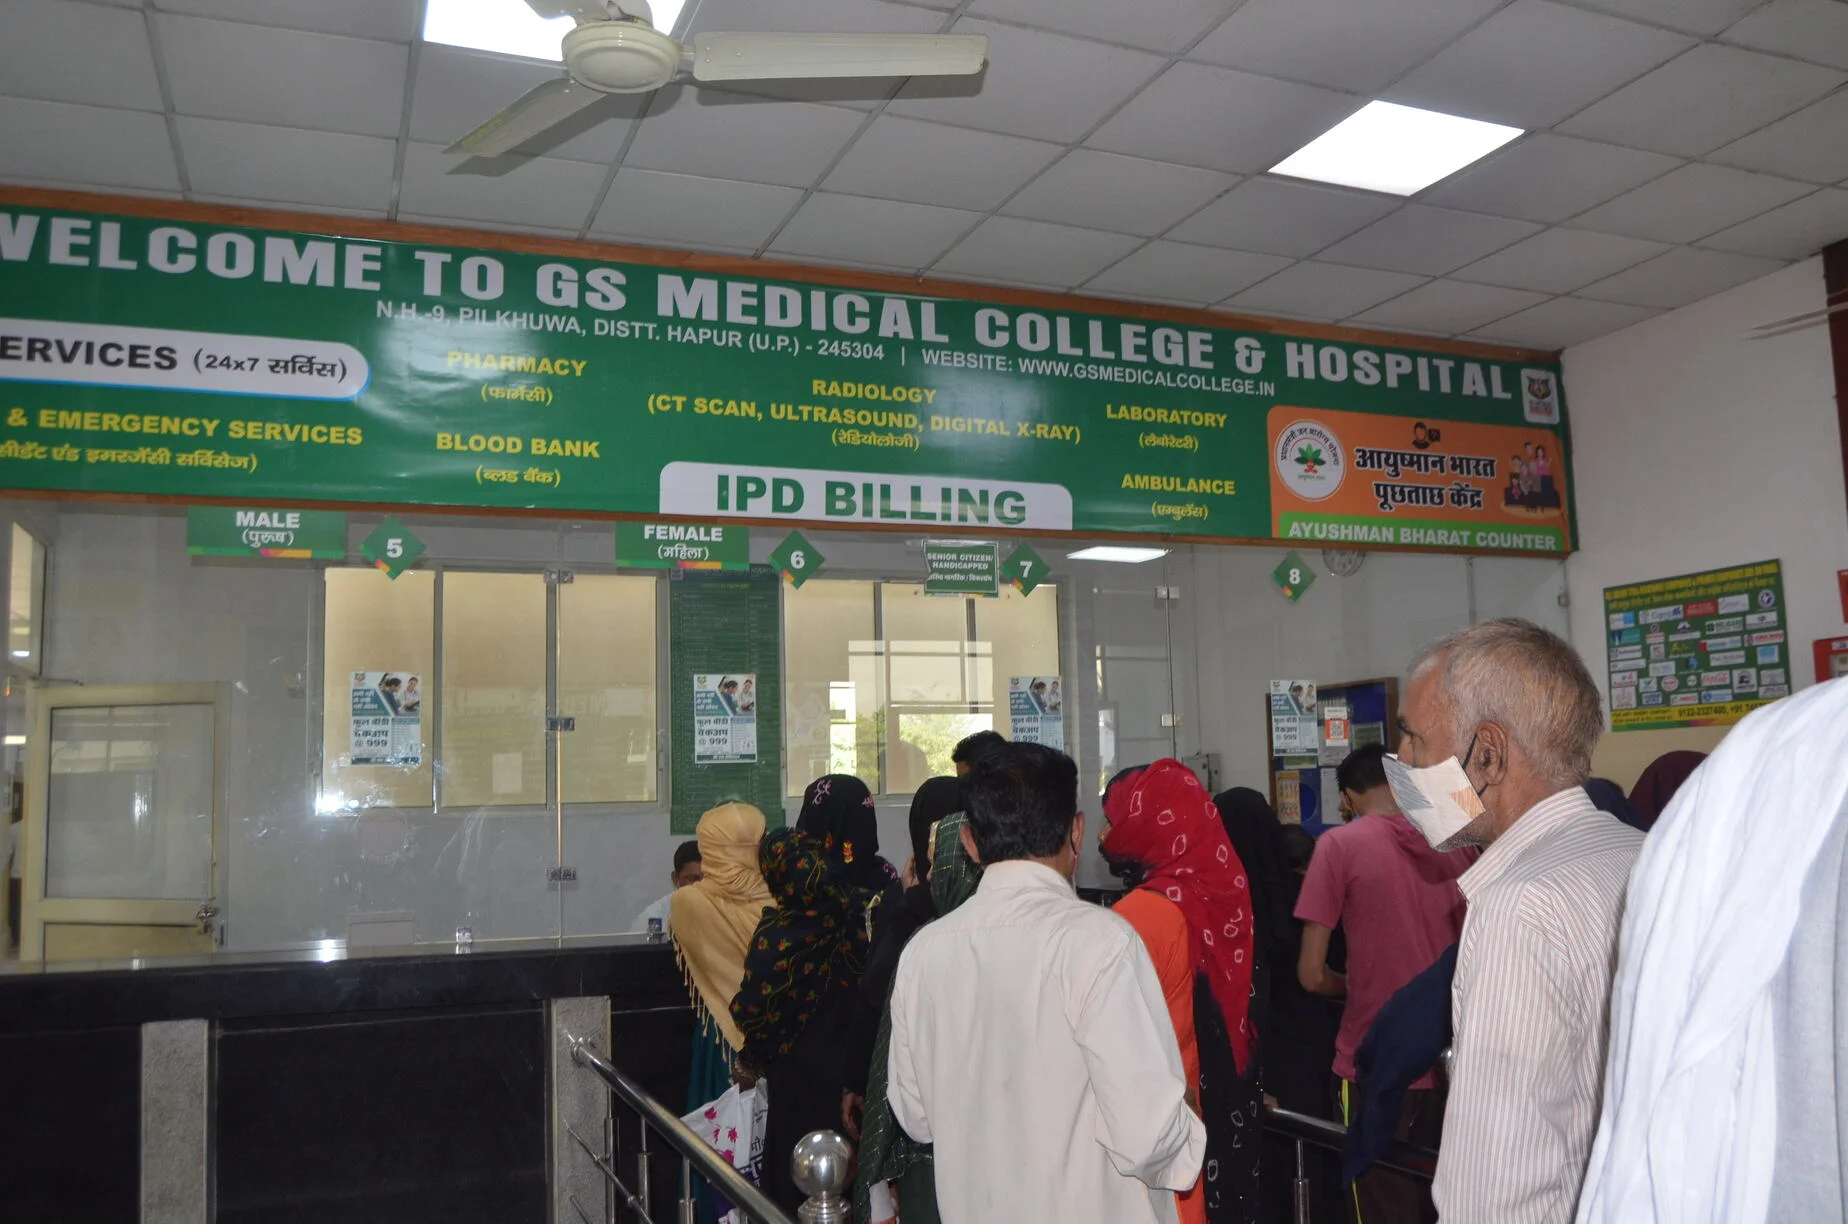 IPD Billing of GS Hospital